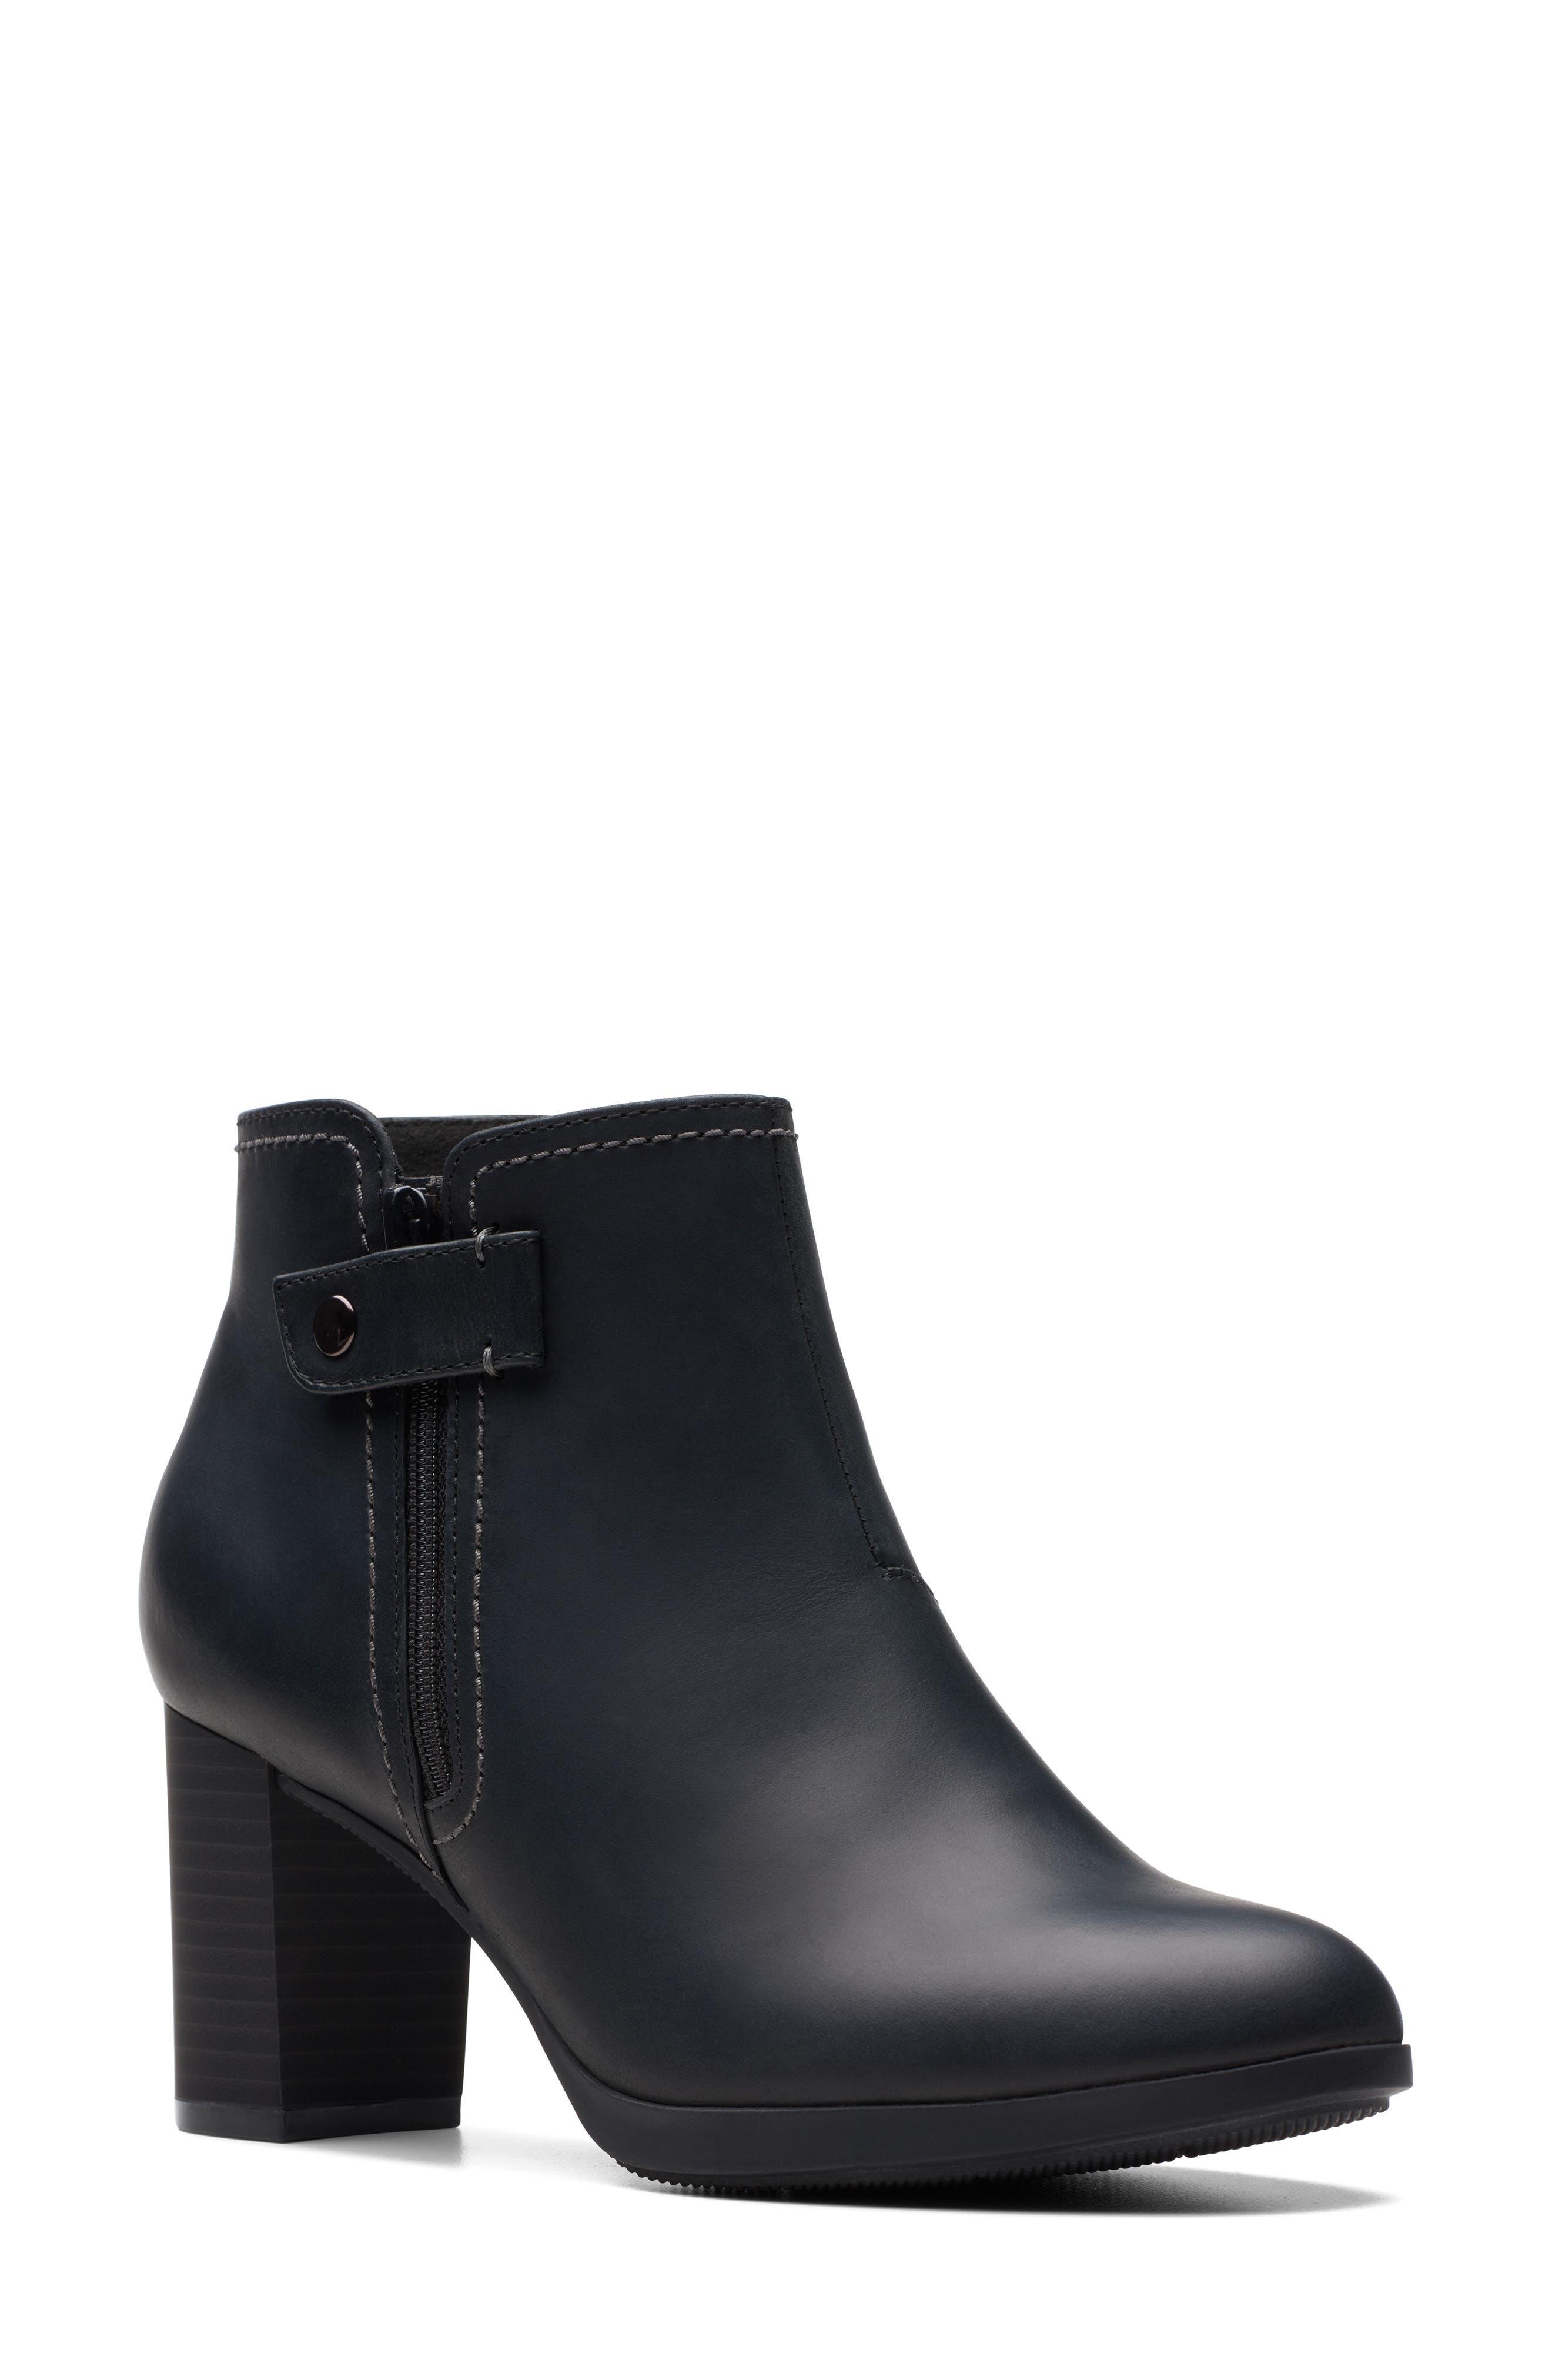 Clarks Bayla Leather Bootie in Black | Lyst